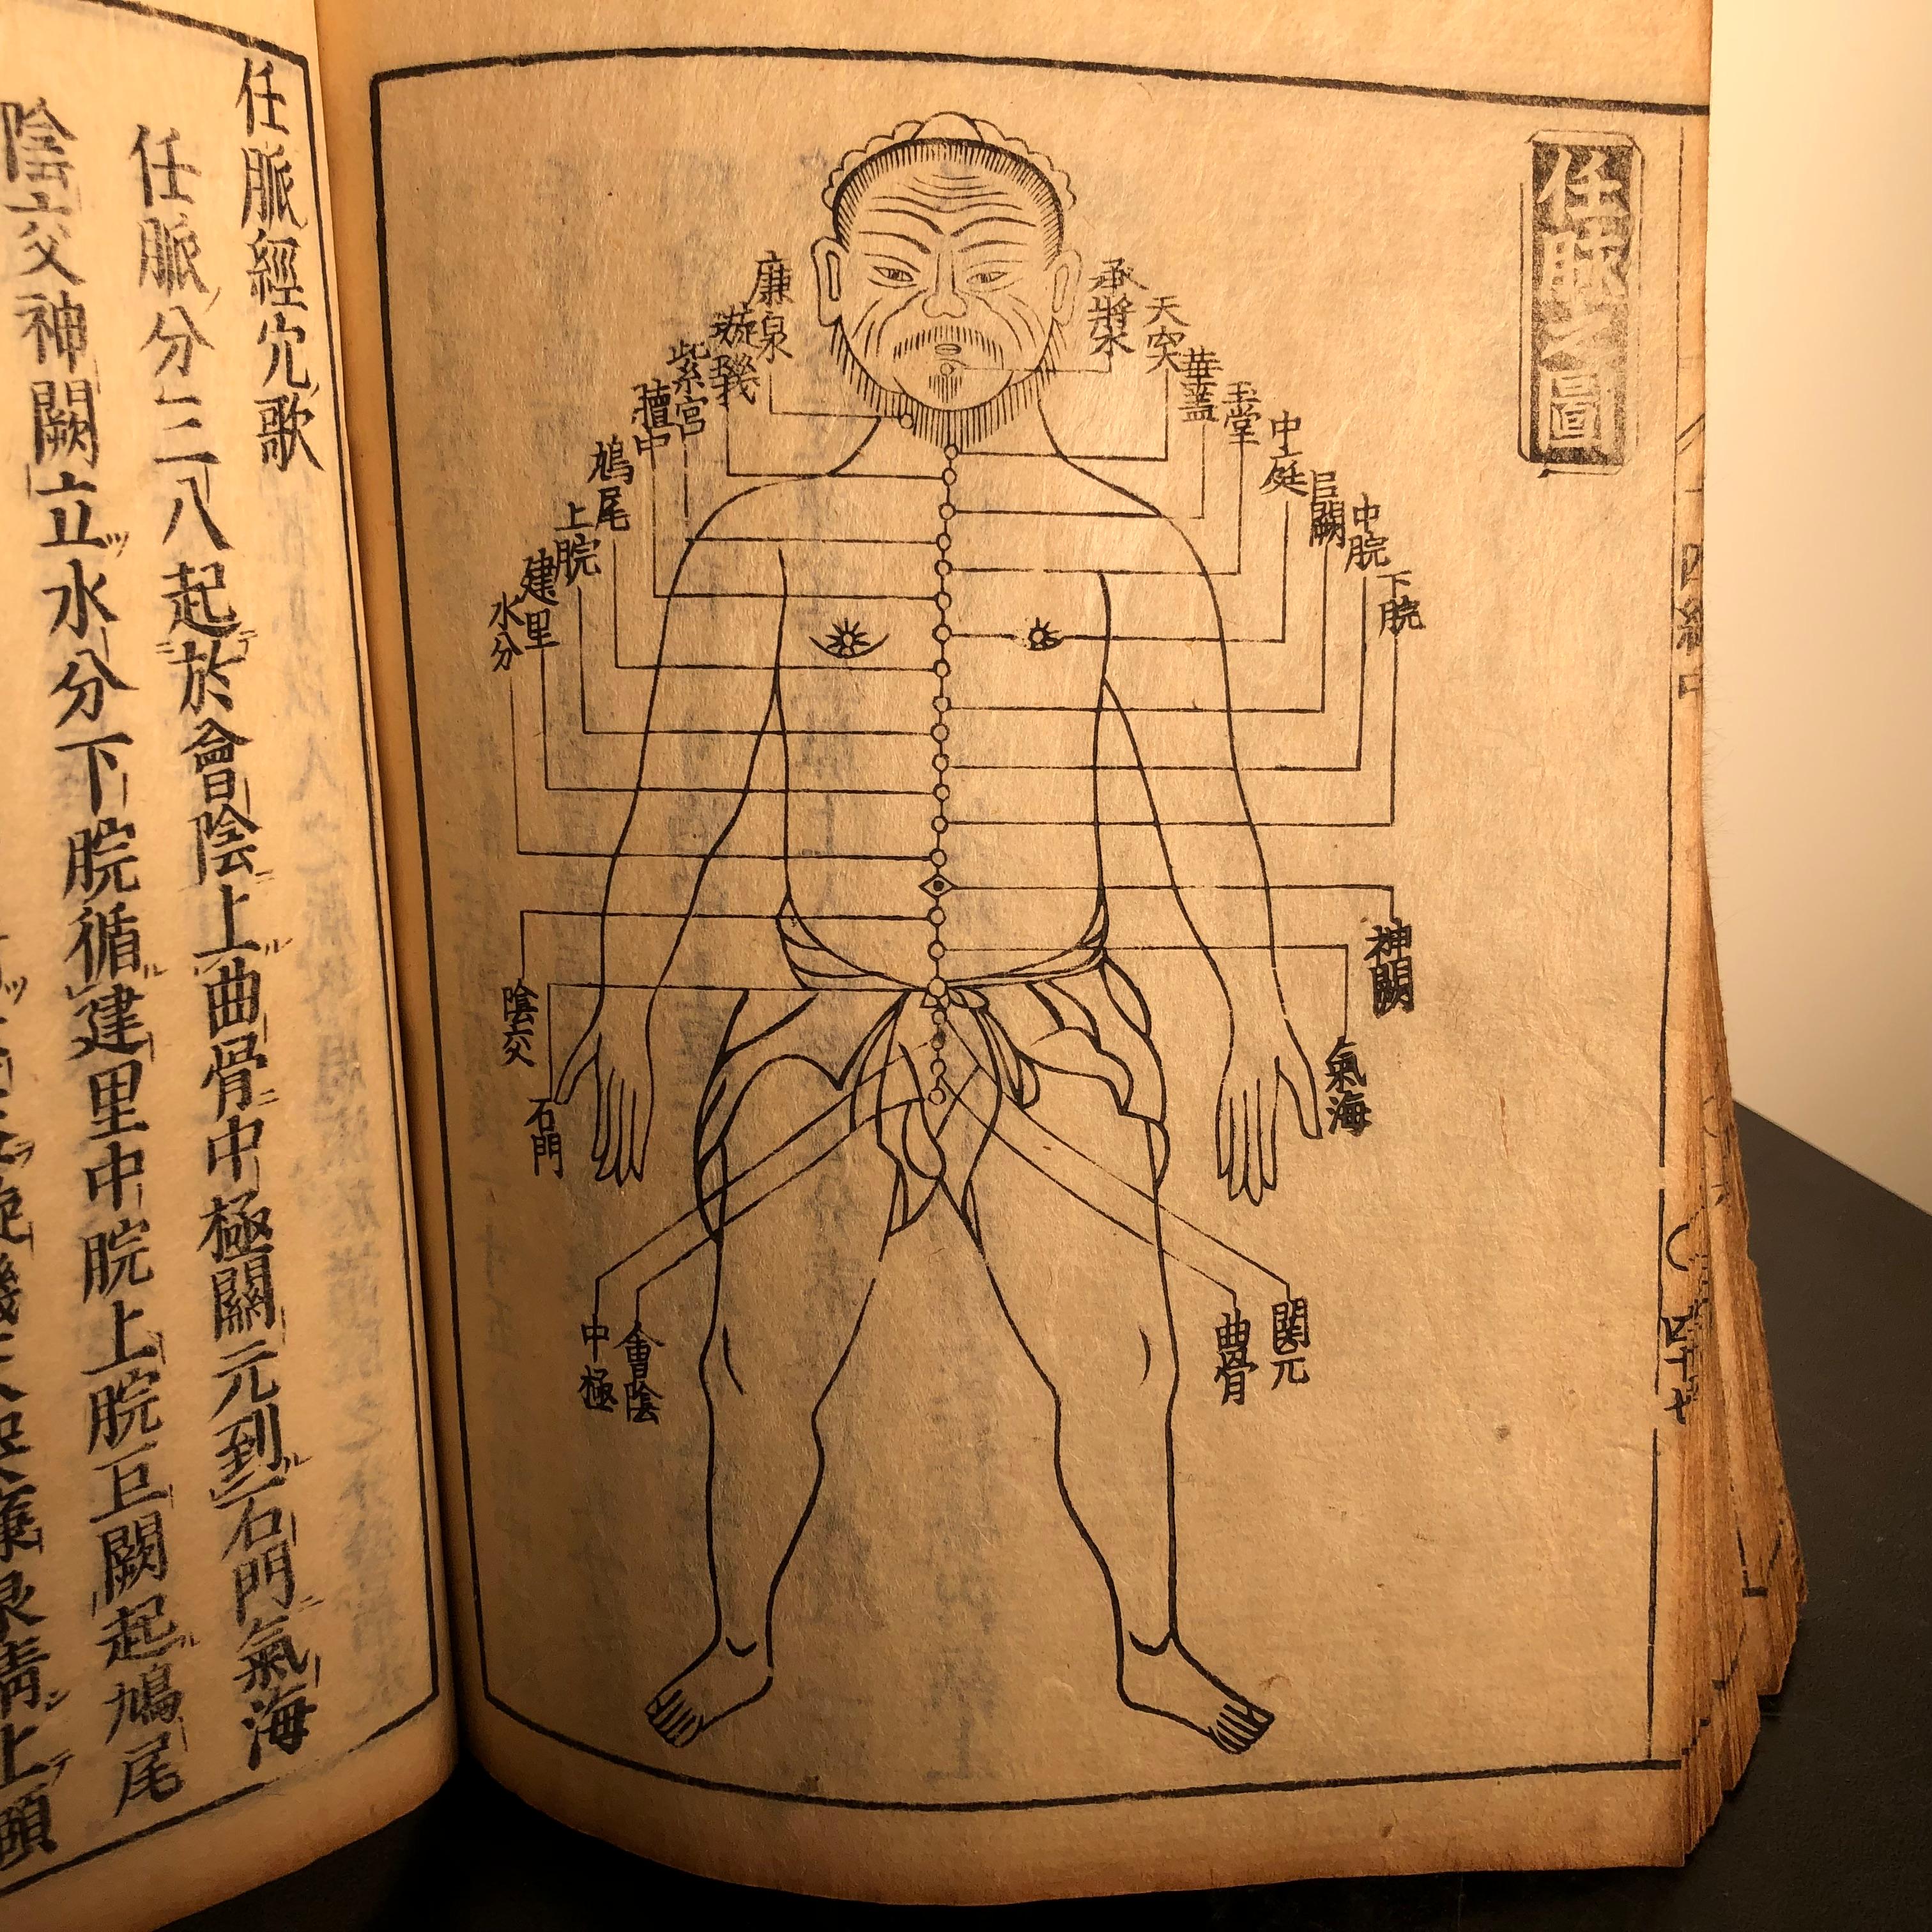 Important Acupuncture Japanese Antique Woodblock Guide Book, 19th Century Prints 1